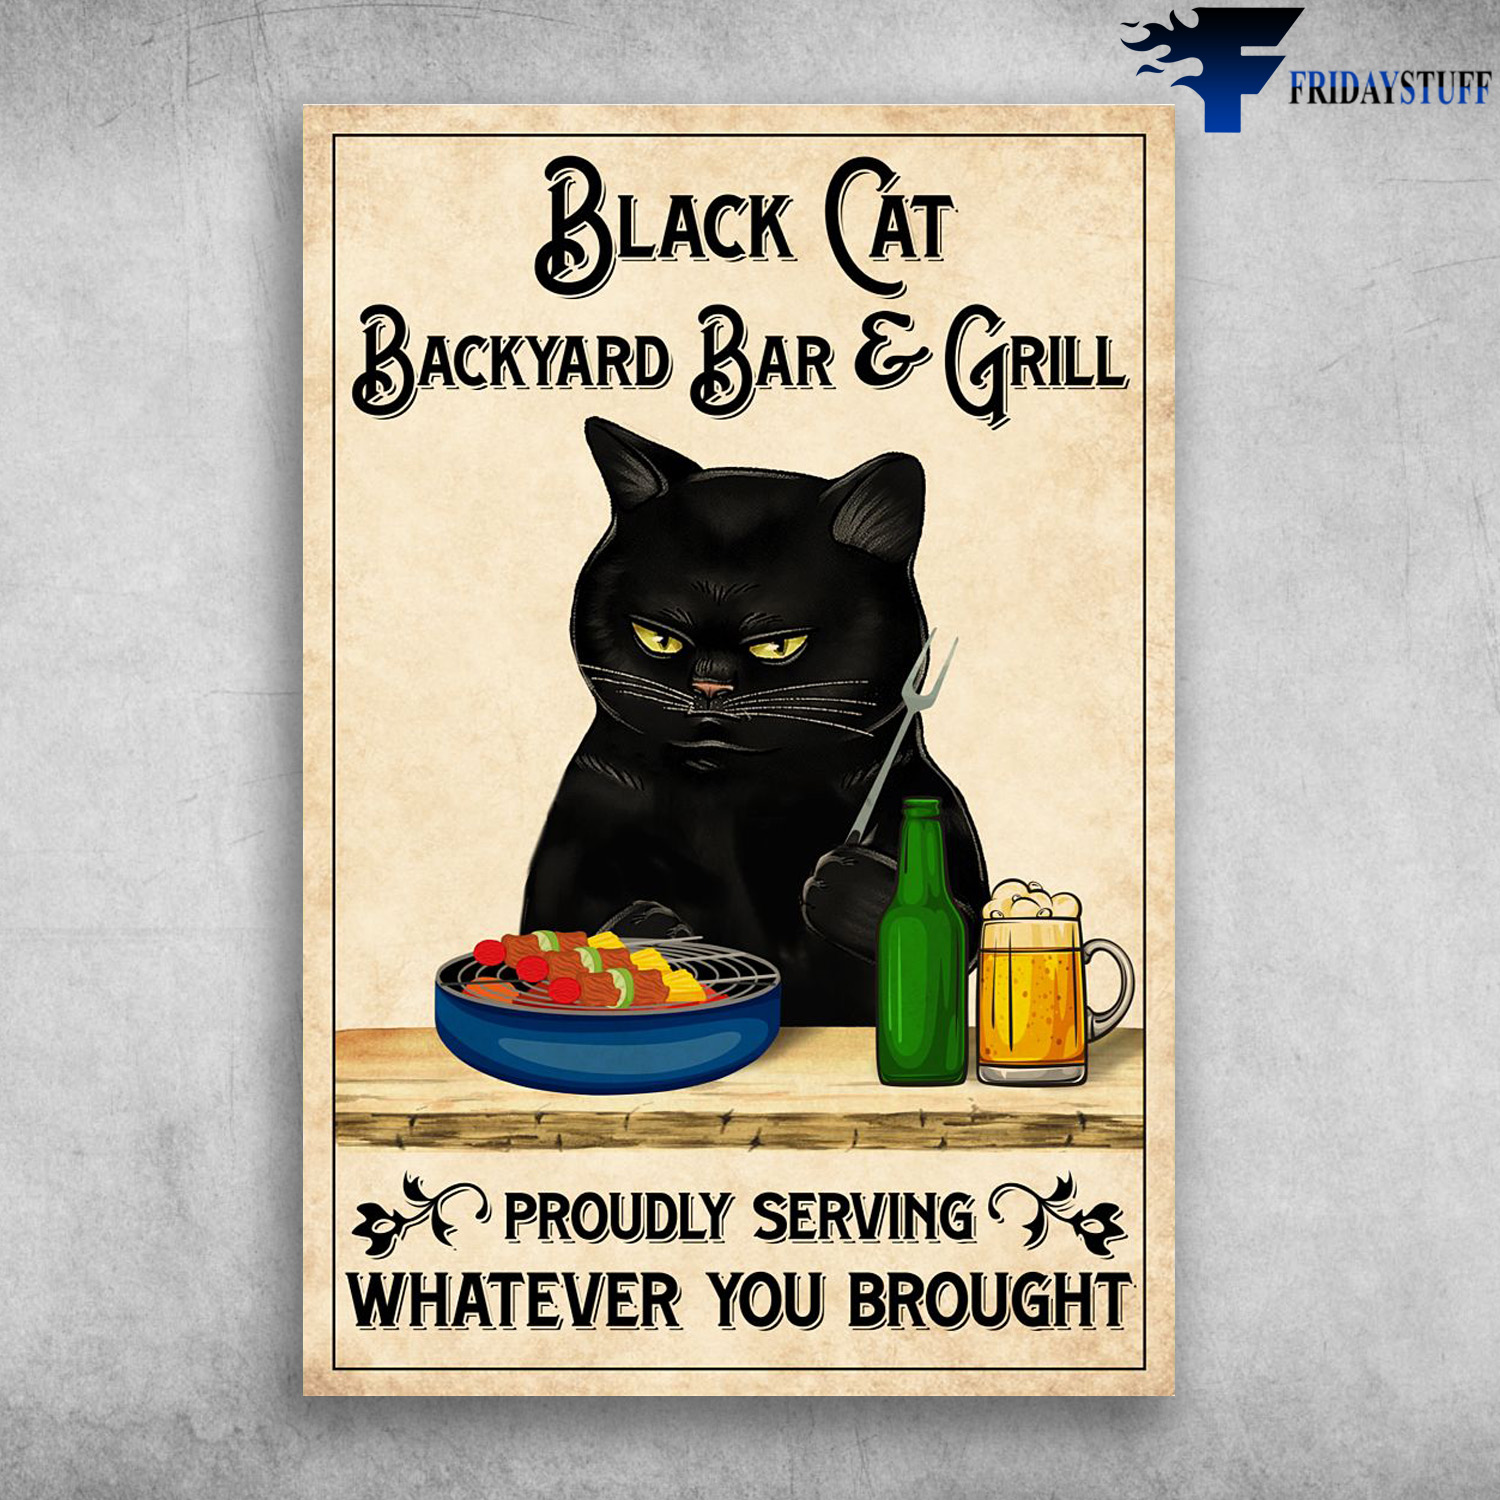 Black Cat Grilling Meat And Drinking Beer - Black Cat Backyard Bar And Grill, Proudly Serving, Whatever You Brought